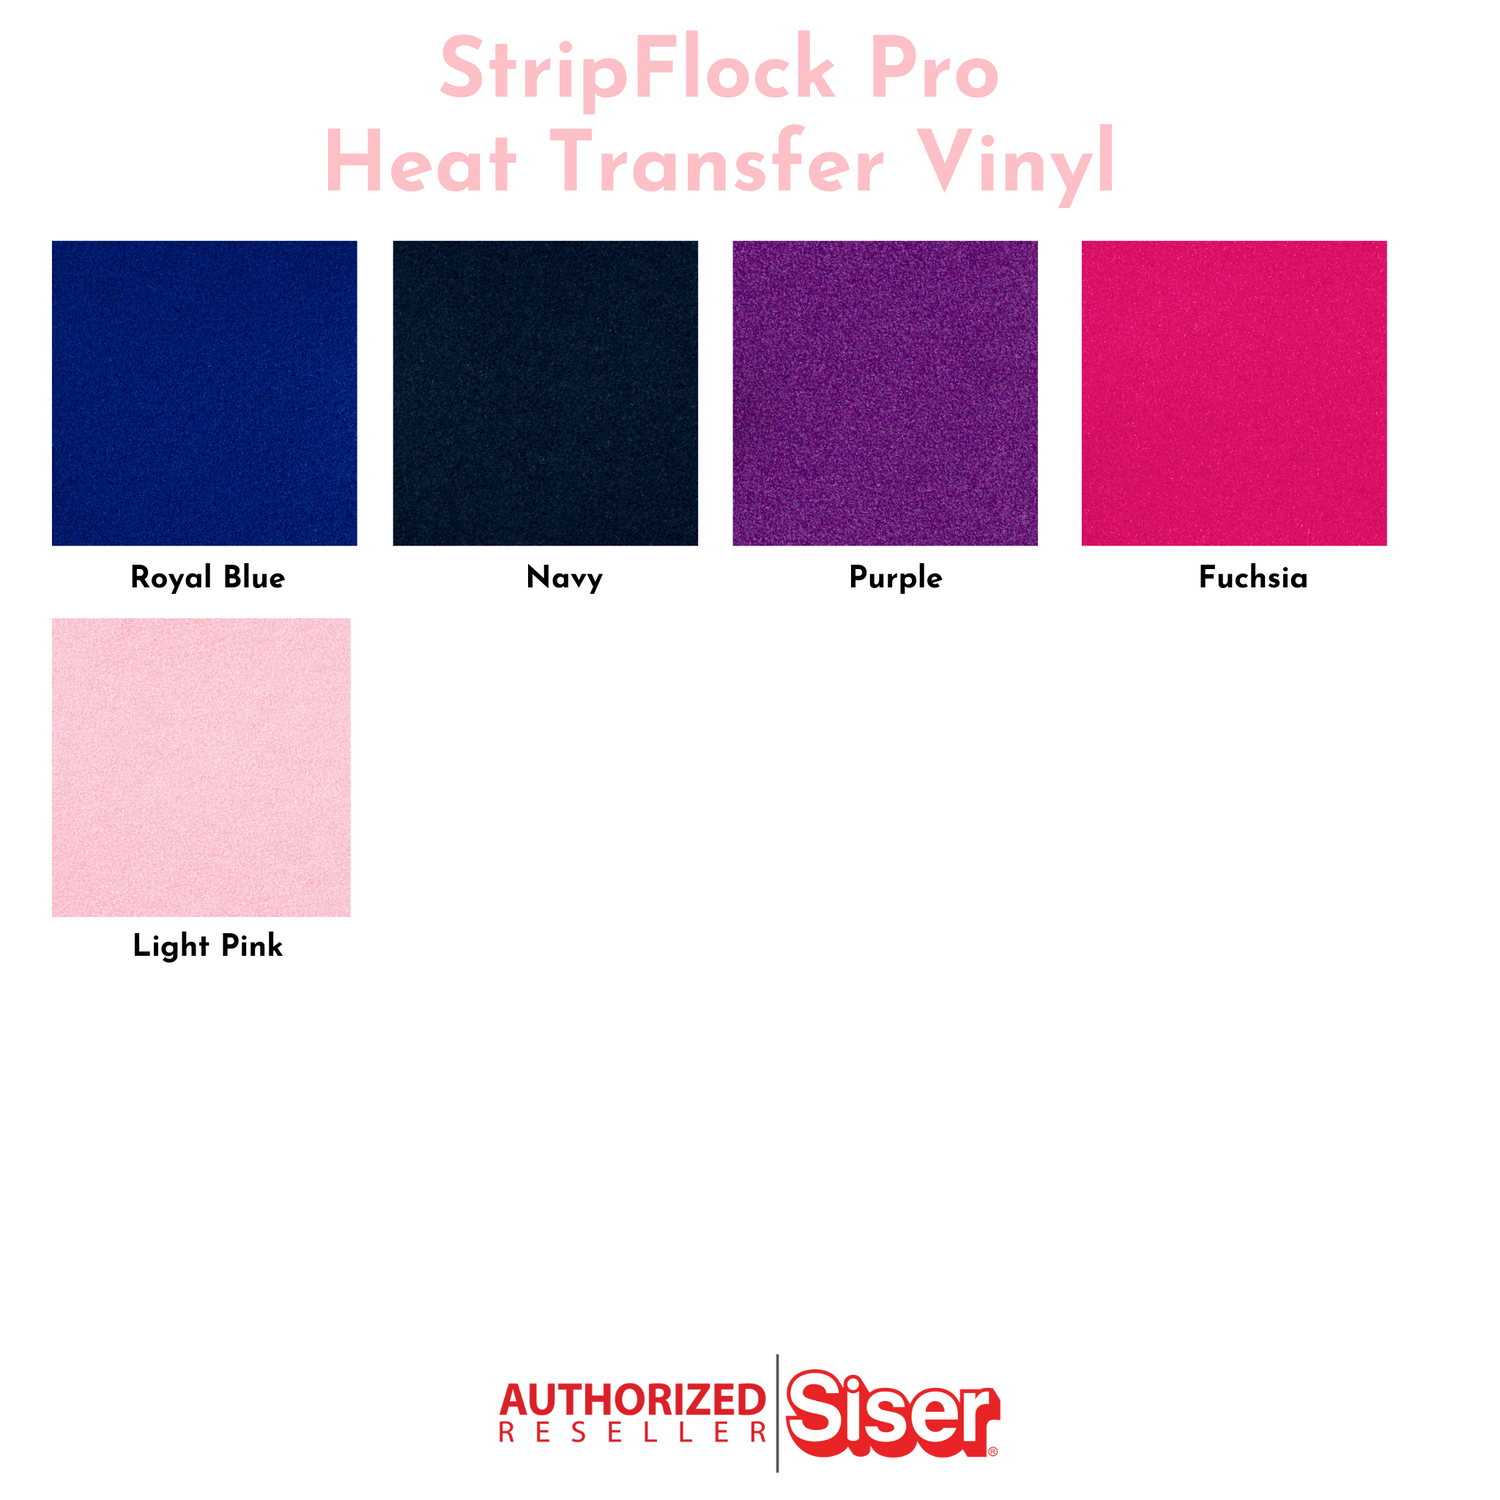 StripflockLearn All About This Fun Heat Transfer Vinyl